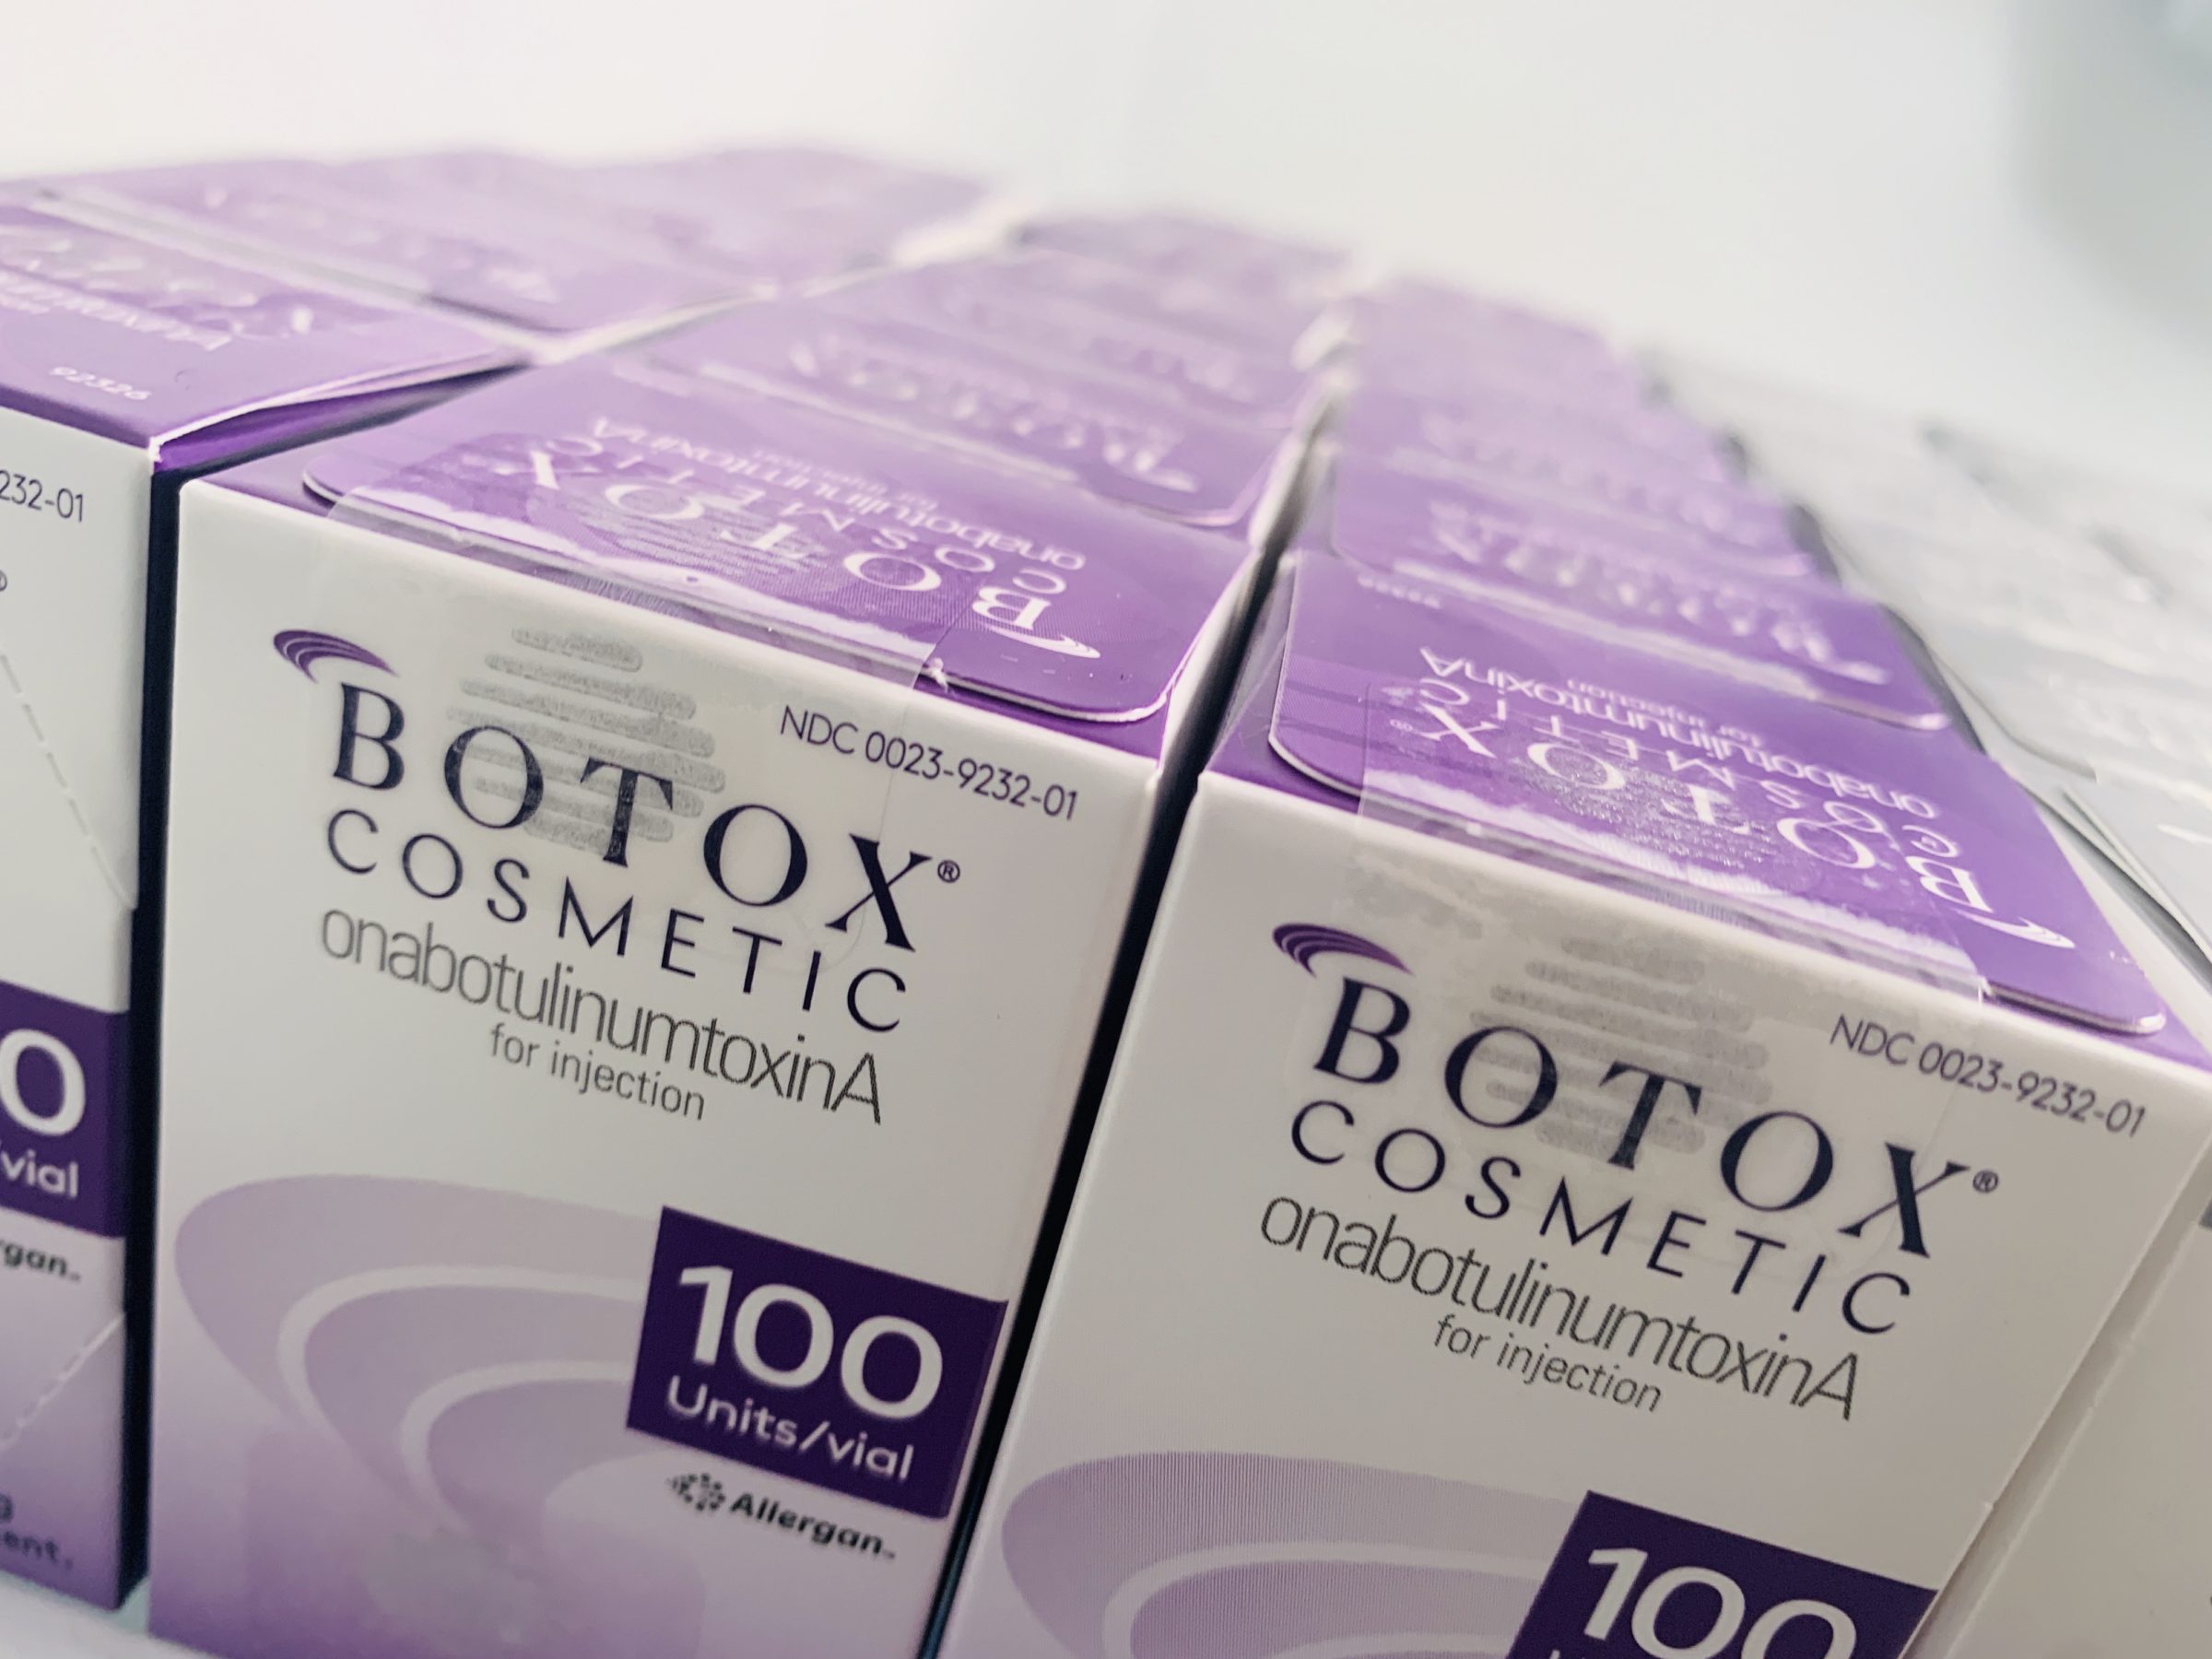 At Well Medical Arts we pride ourselves on the best botox treatments in Seattle. Come see what difference and expert Botox injector makes. Call 206-935-5689 to schedule your appointment.